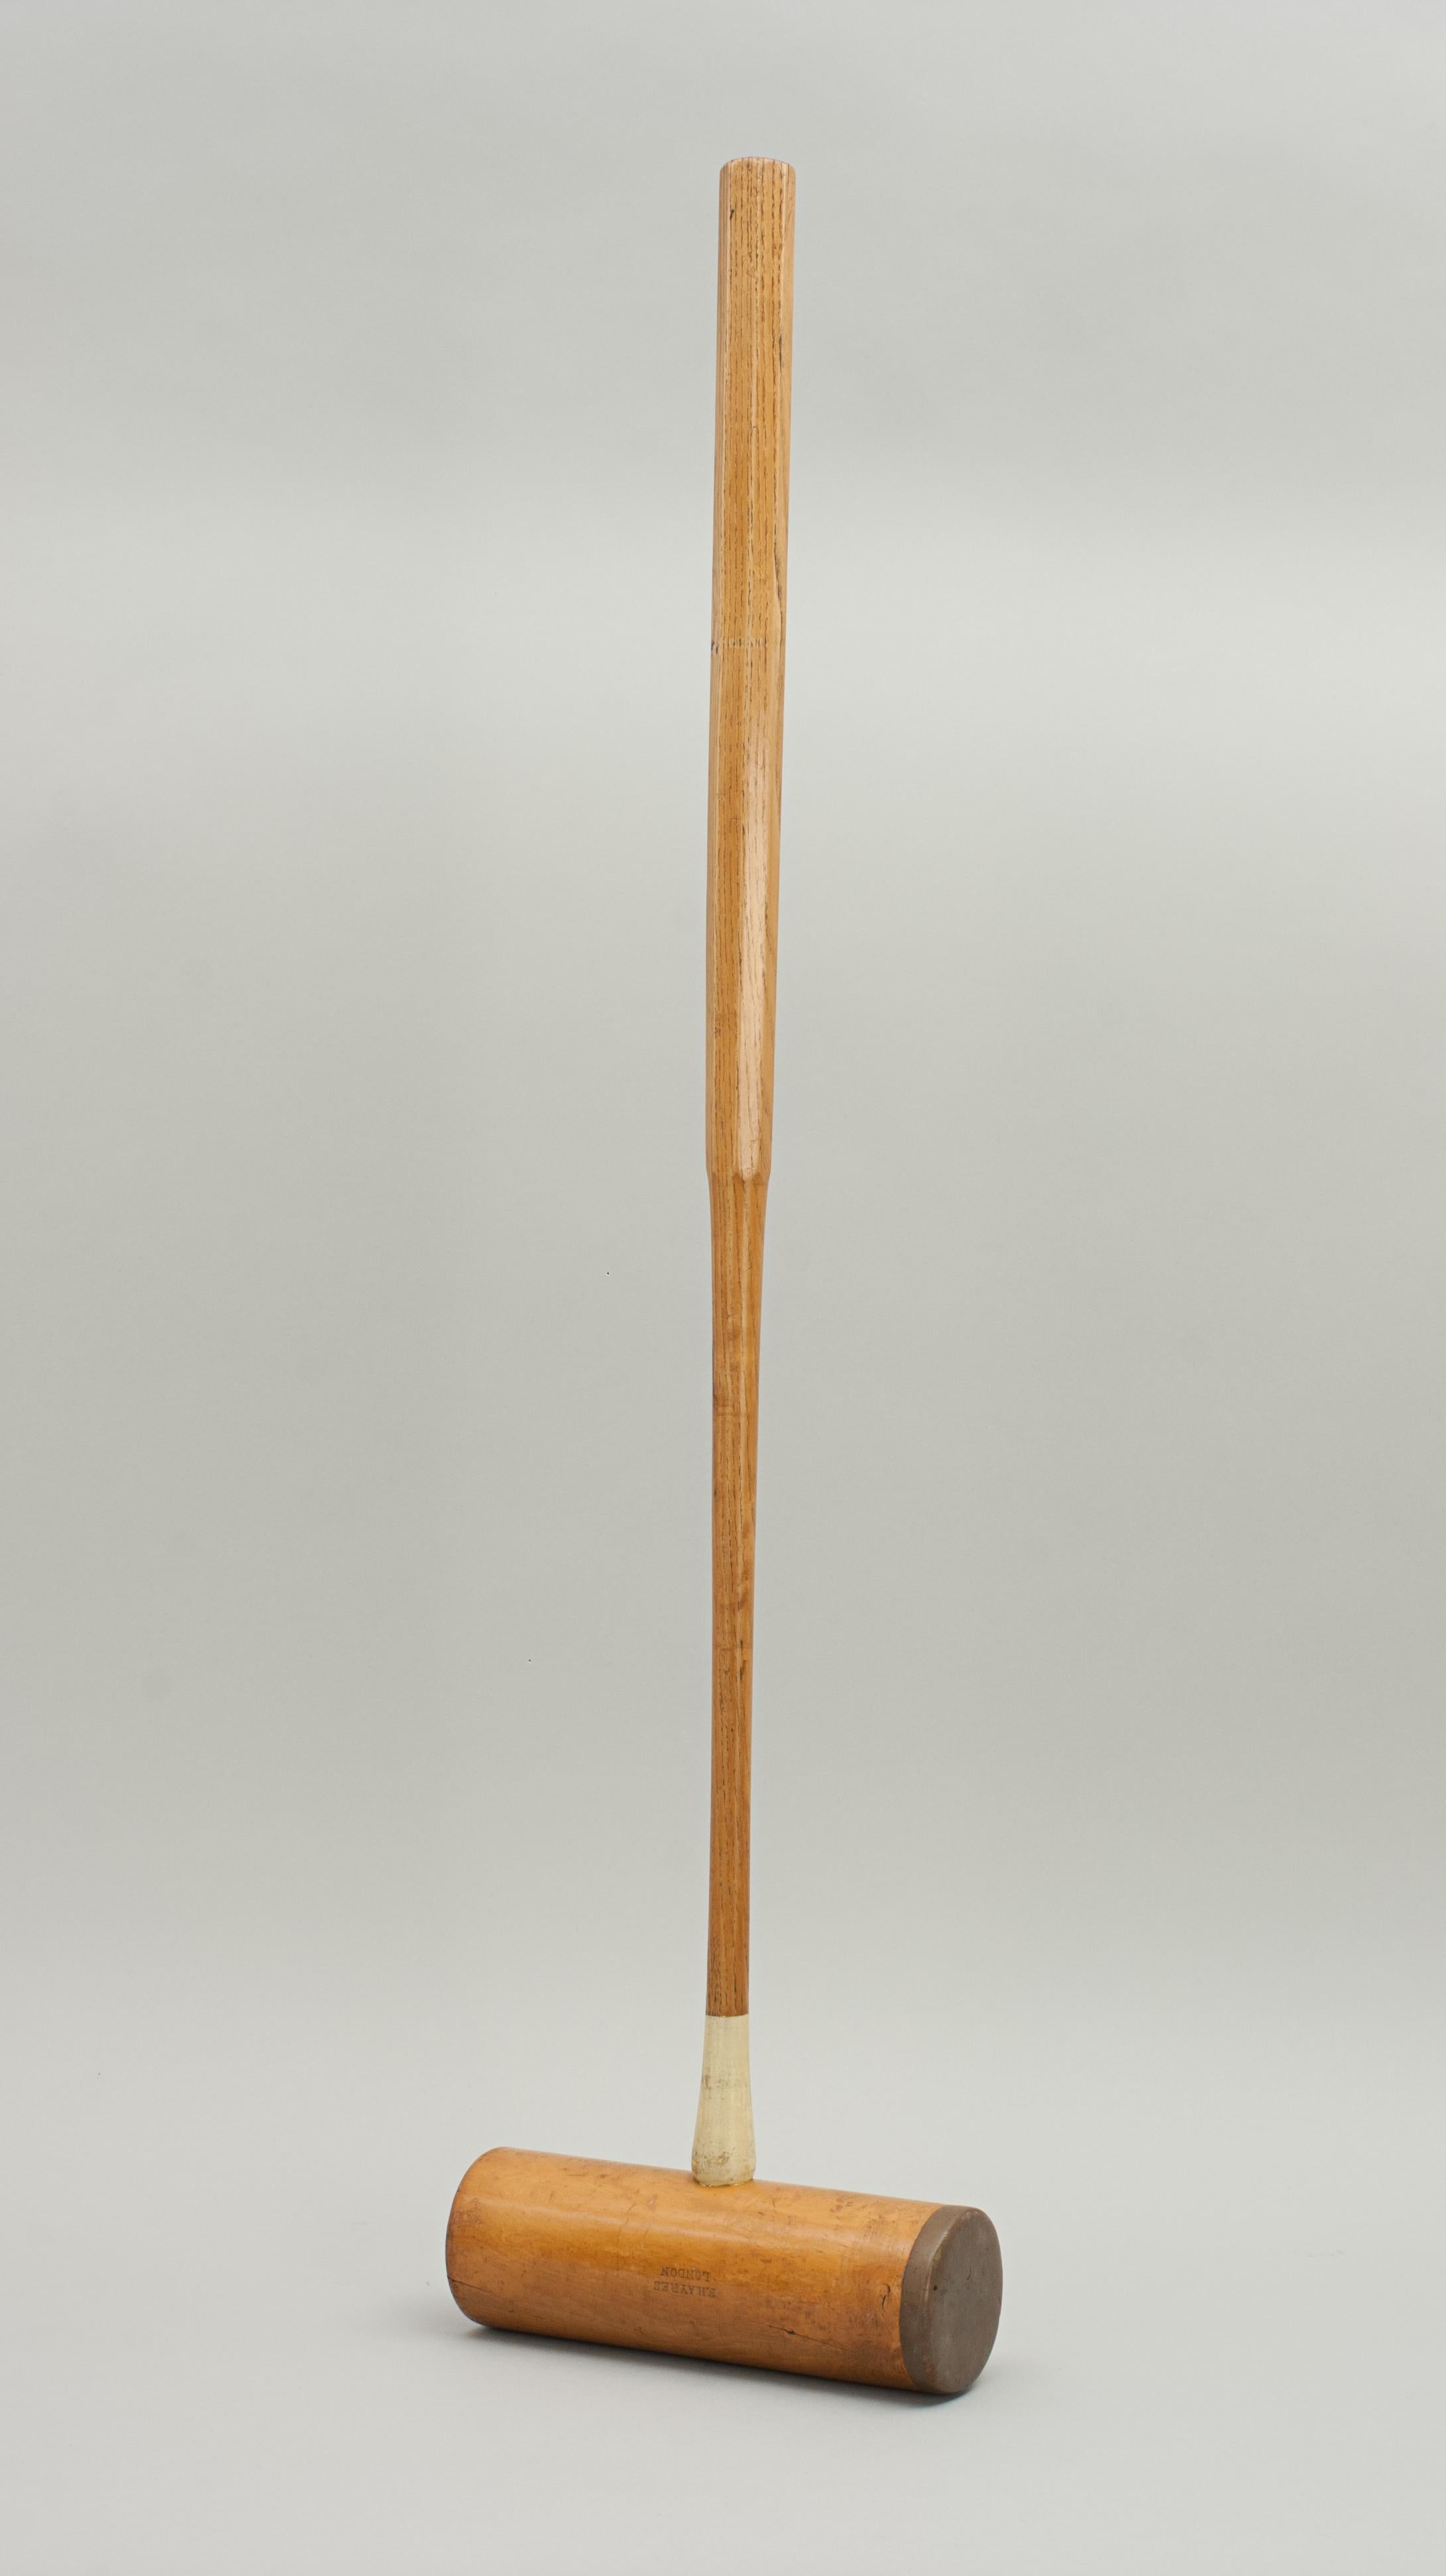 F.H. Ayres Croquet Mallet.
A good vintage dual faced croquet mallet by F.H. Ayres. The handle is made of ash and is fitted to a boxwood head. The head is stamped 'F.H. Ayres, London' and has two playing surfaces. One surface is plain and the other